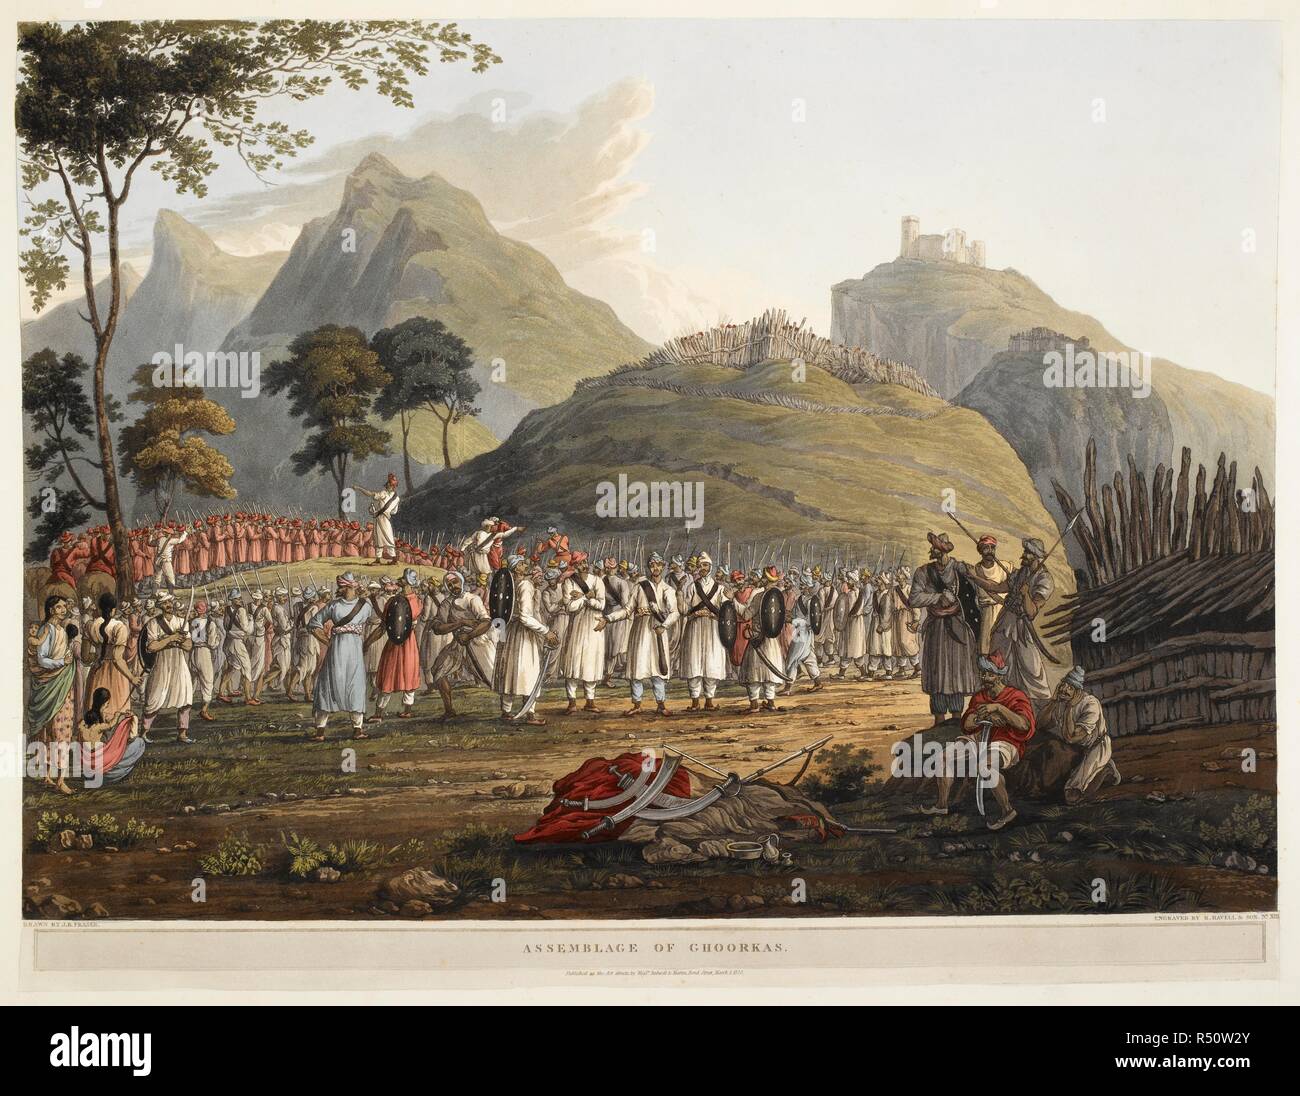 'Assemblage of Ghoorkas'. Coloured aquatint by Robert Havell and son, after J. B. Fraser. Views in the Himala Mountains. Published Rodwell & Martin, London, 1820. Source: X502(13), plate 13. Stock Photo